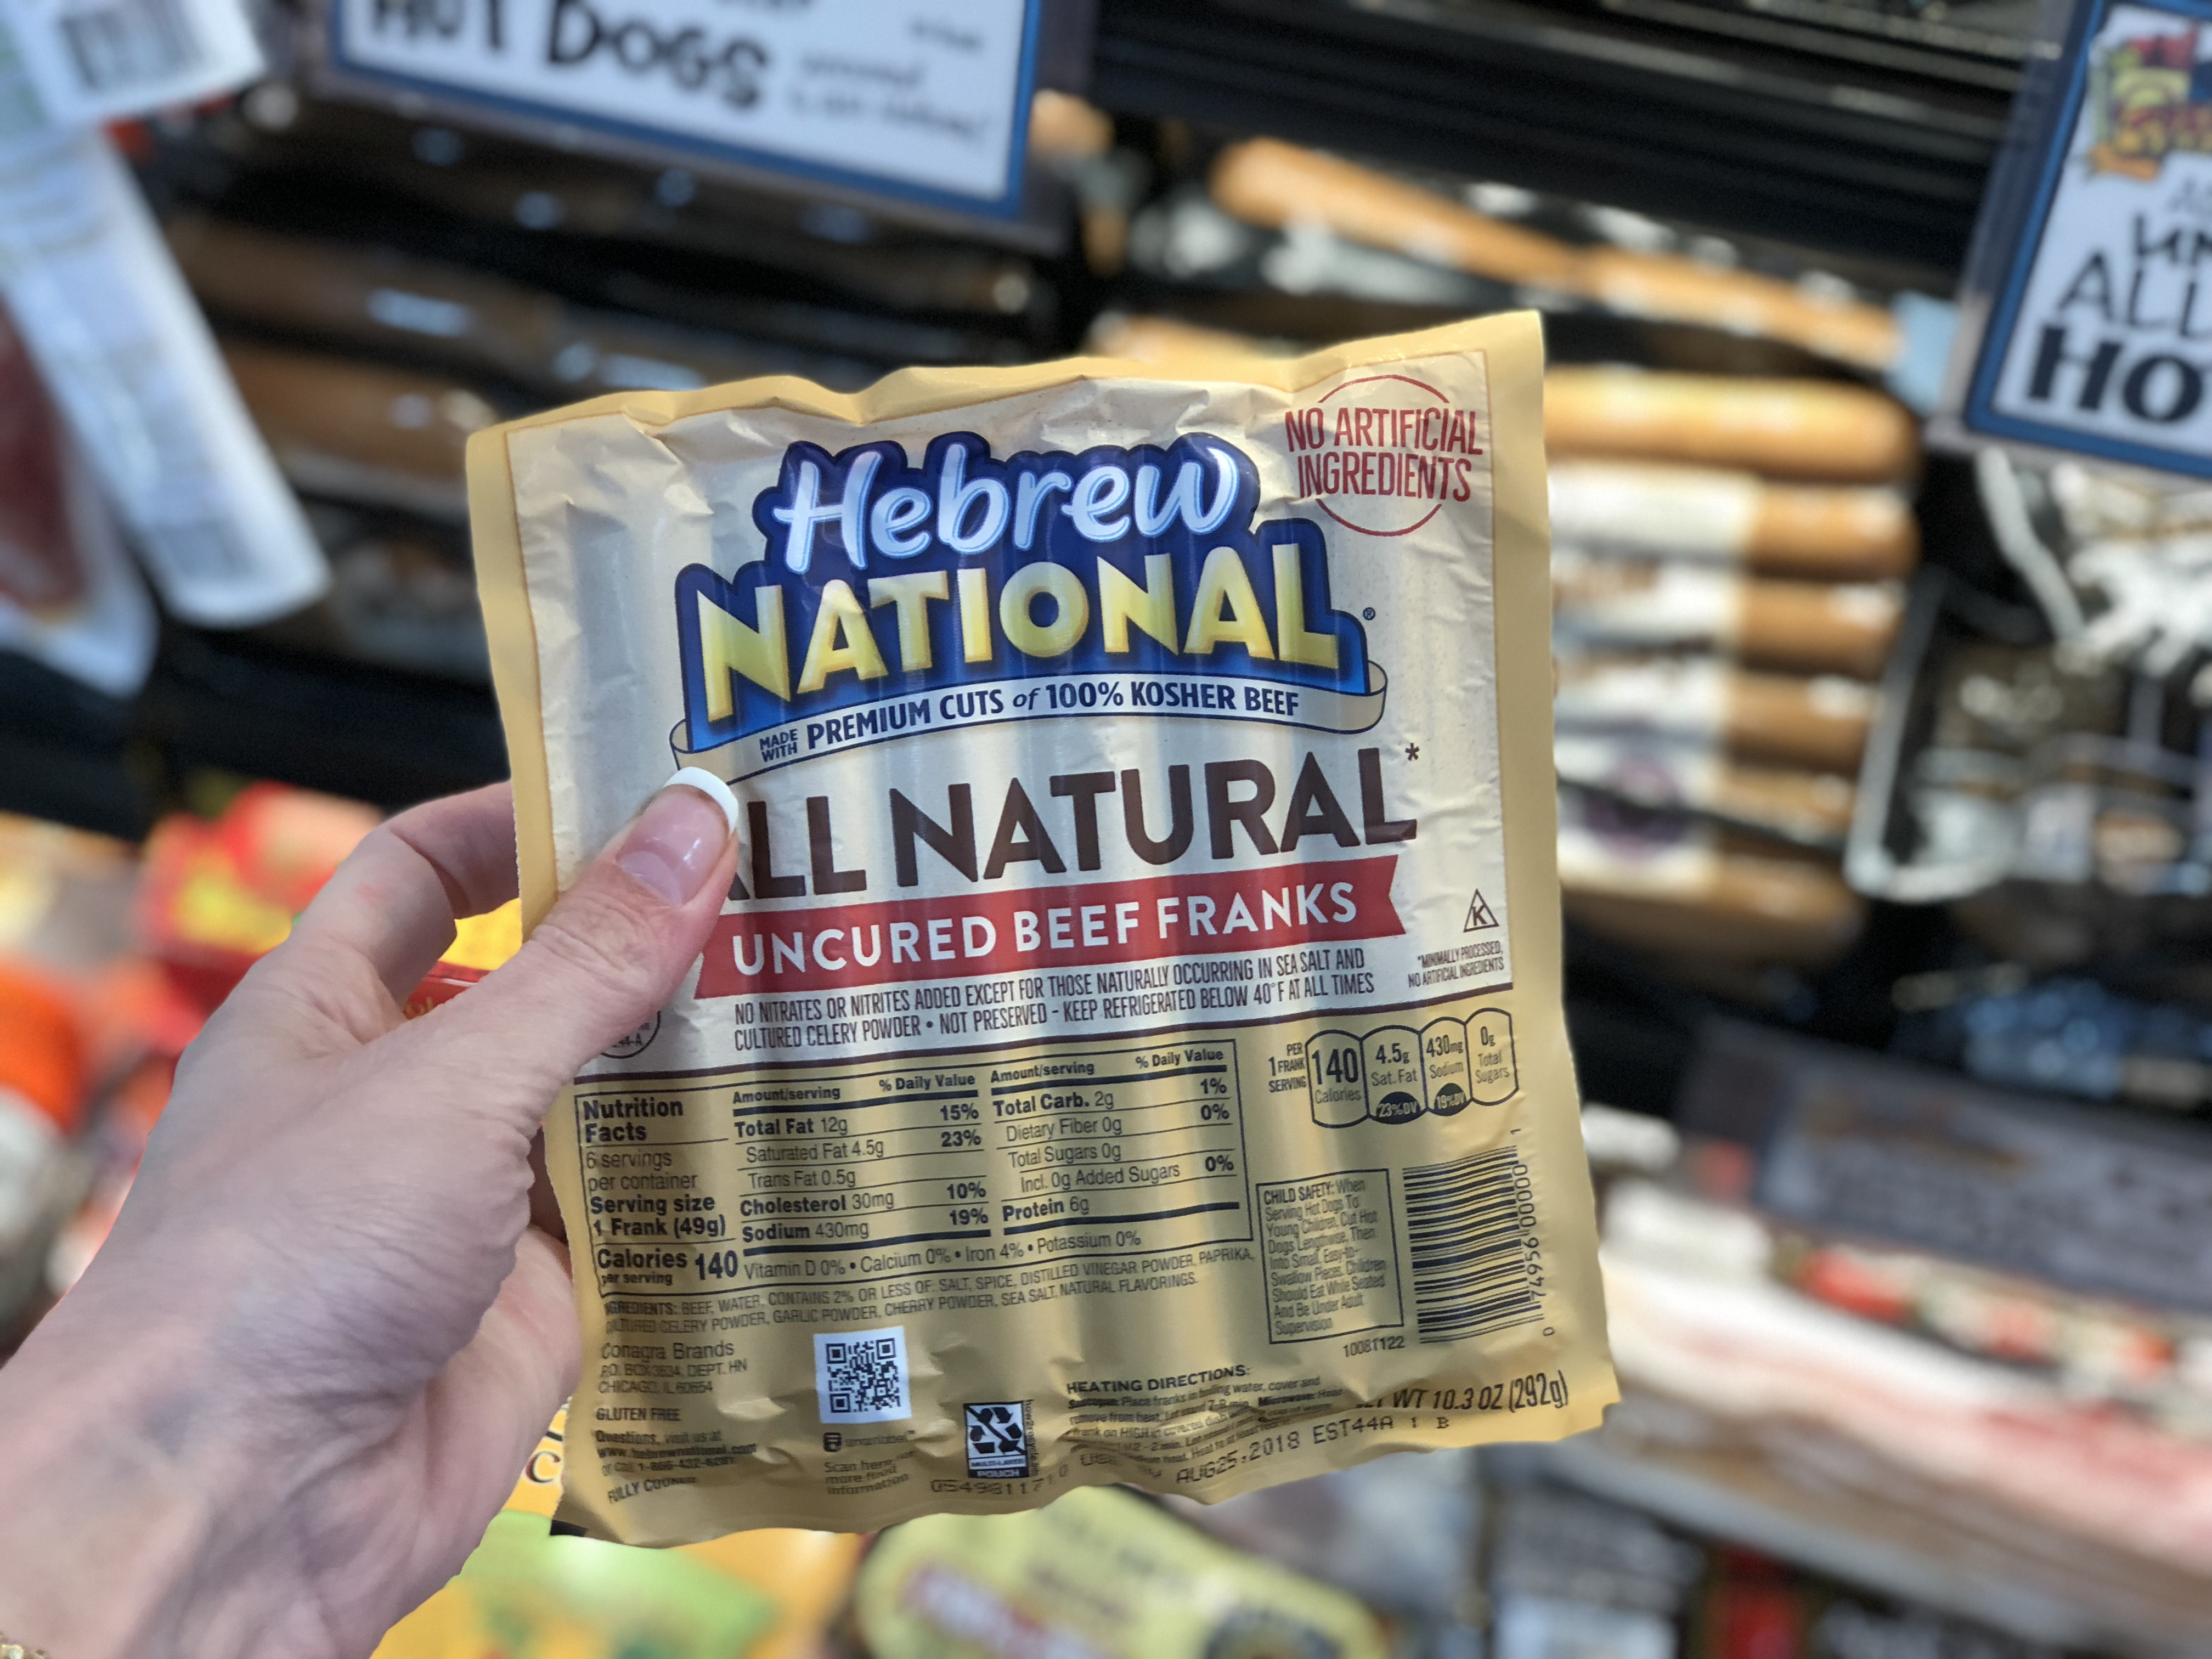 keto and low-carb hot dogs, sausages, and brats – Trader joes hebrew national franks